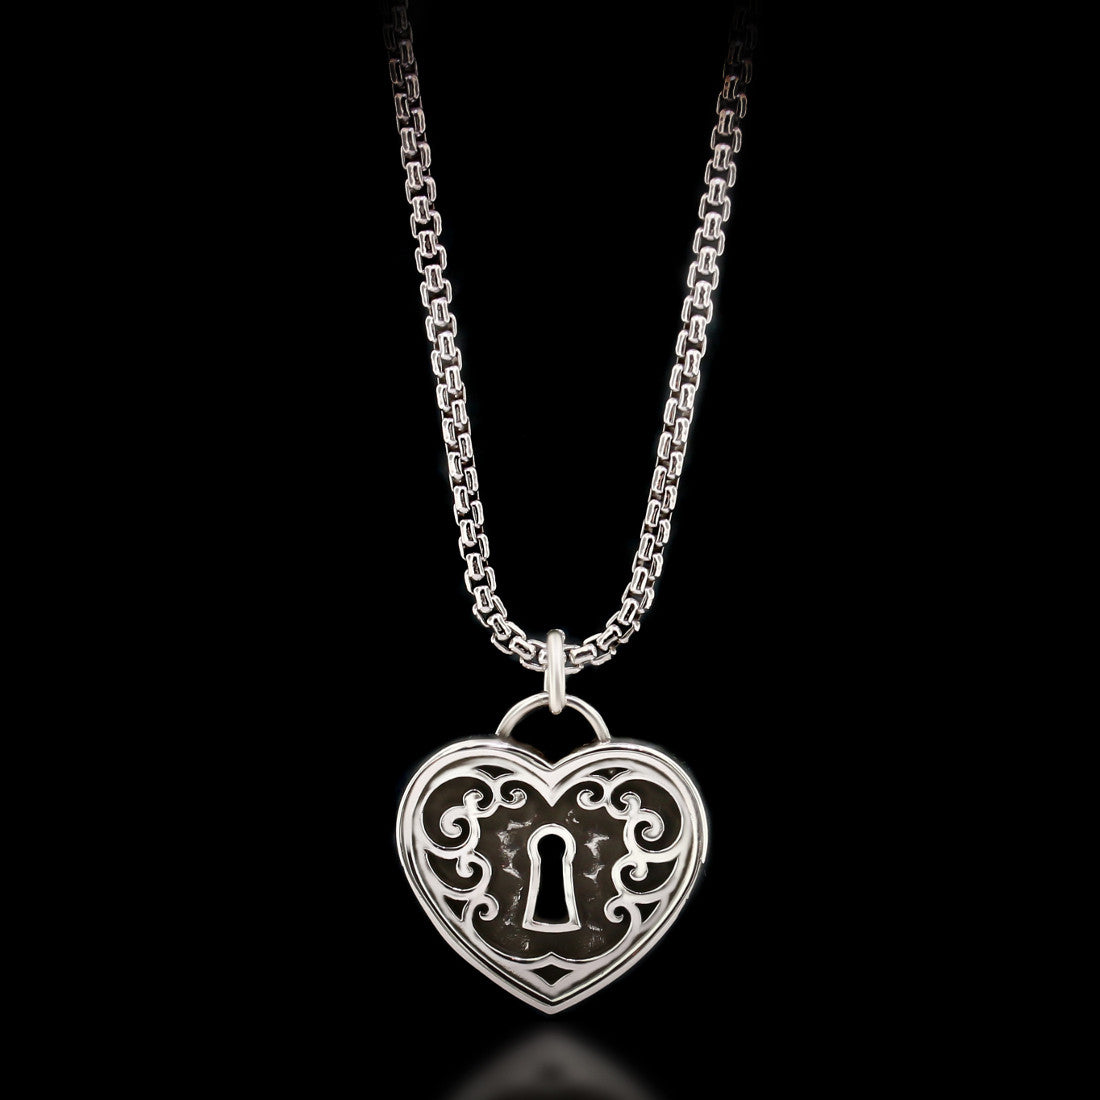 Padlock Heart Necklace - Sterling Silver - Twisted Love NYC